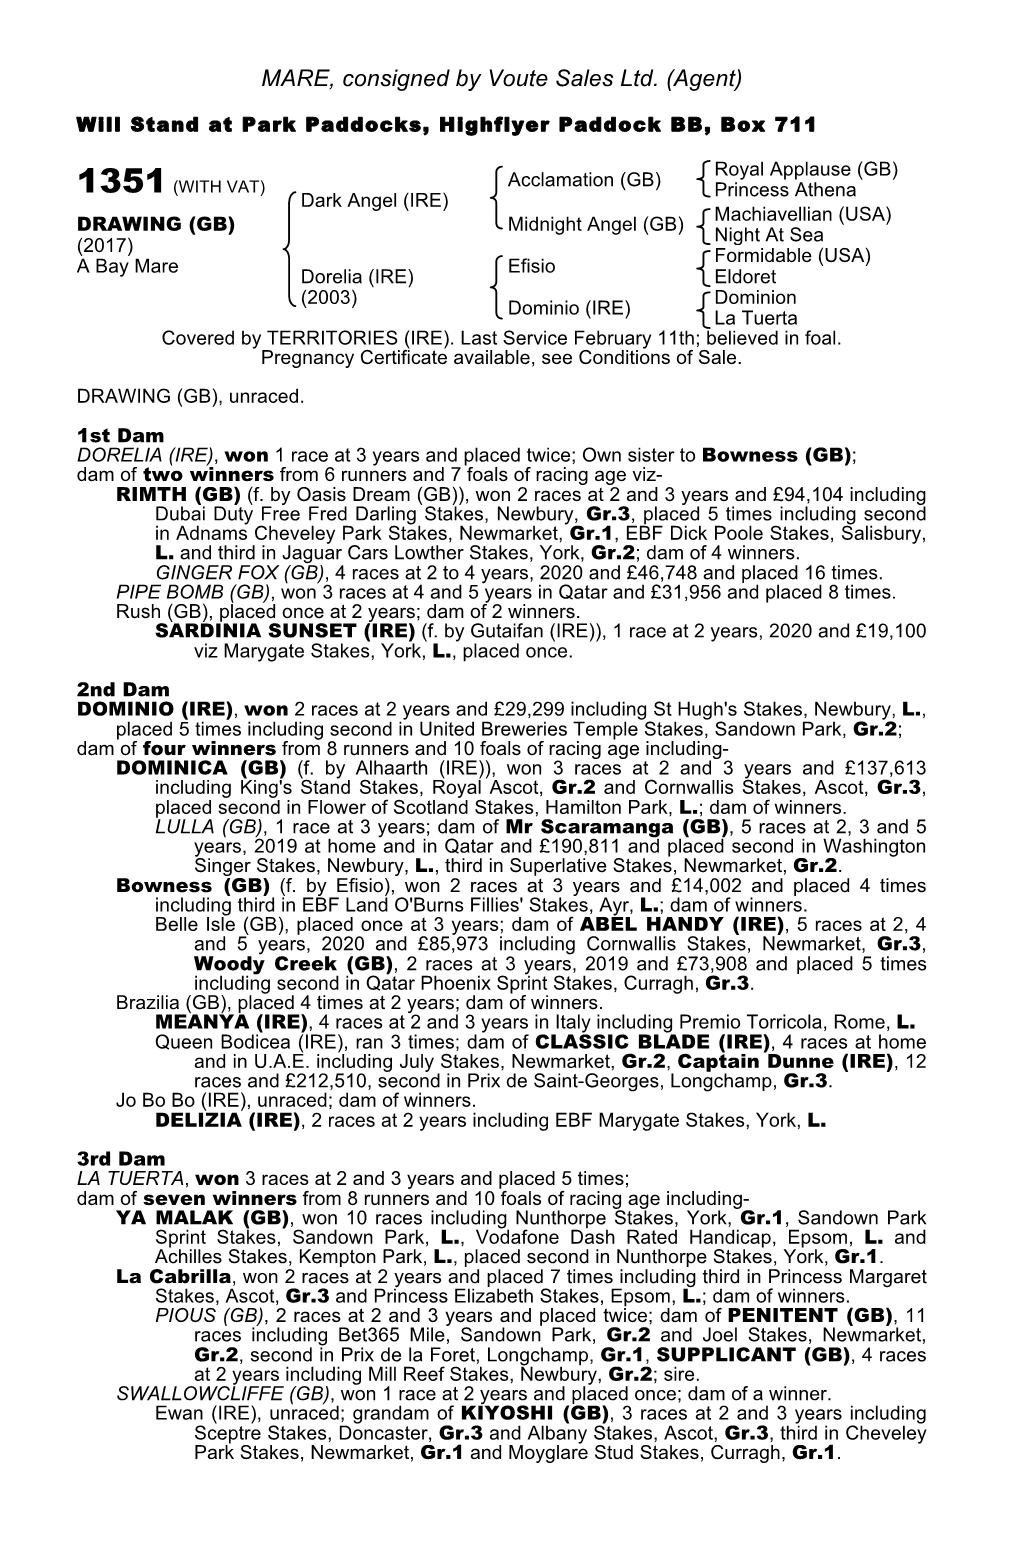 MARE, Consigned by Voute Sales Ltd. (Agent)